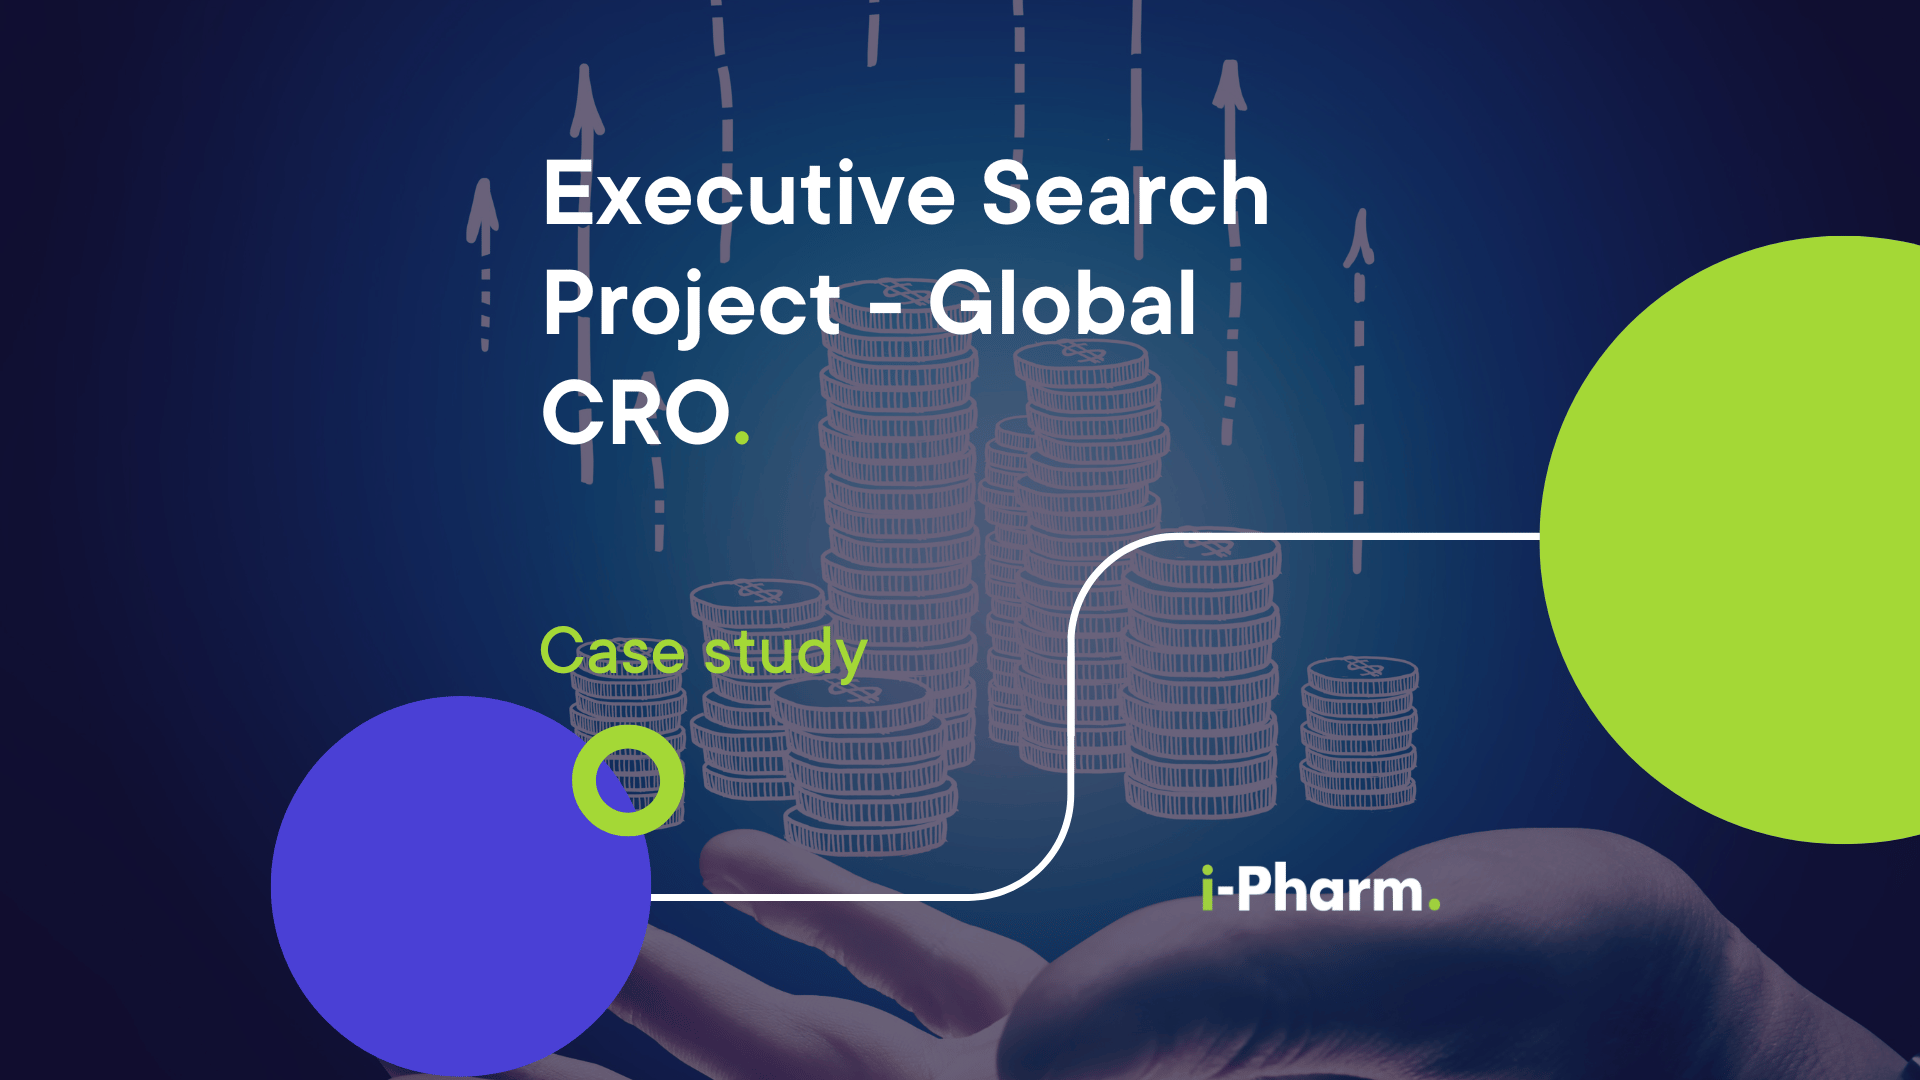 Case Study: Executive Search Project for Global CRO